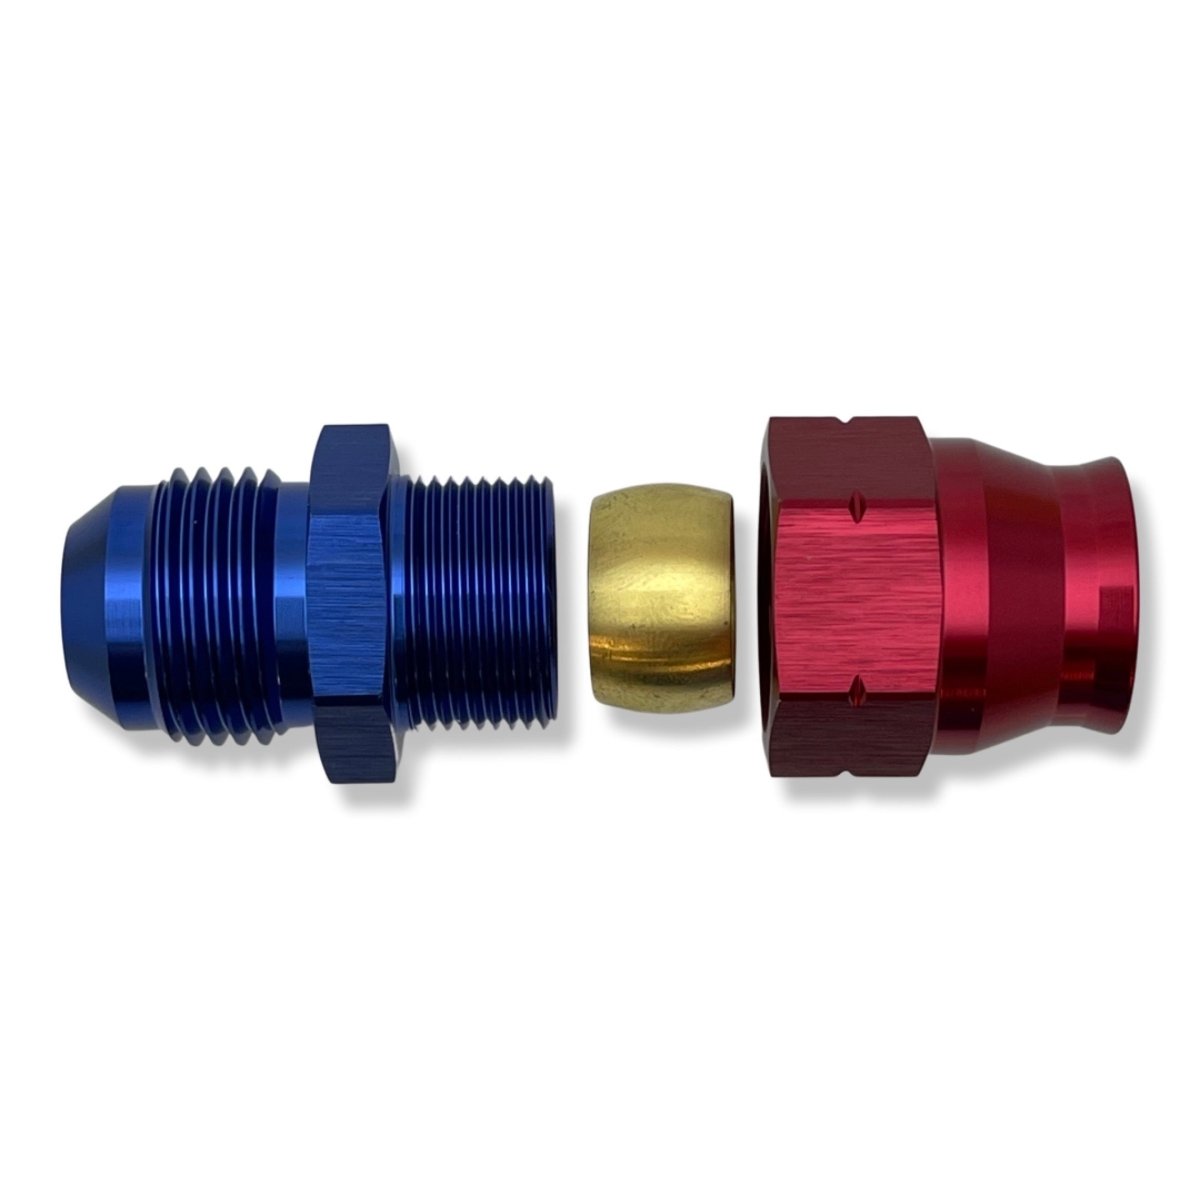 -10 AN MALE TO 5/8" TUBING - RED/BLUE - 165010 by AN3 Parts